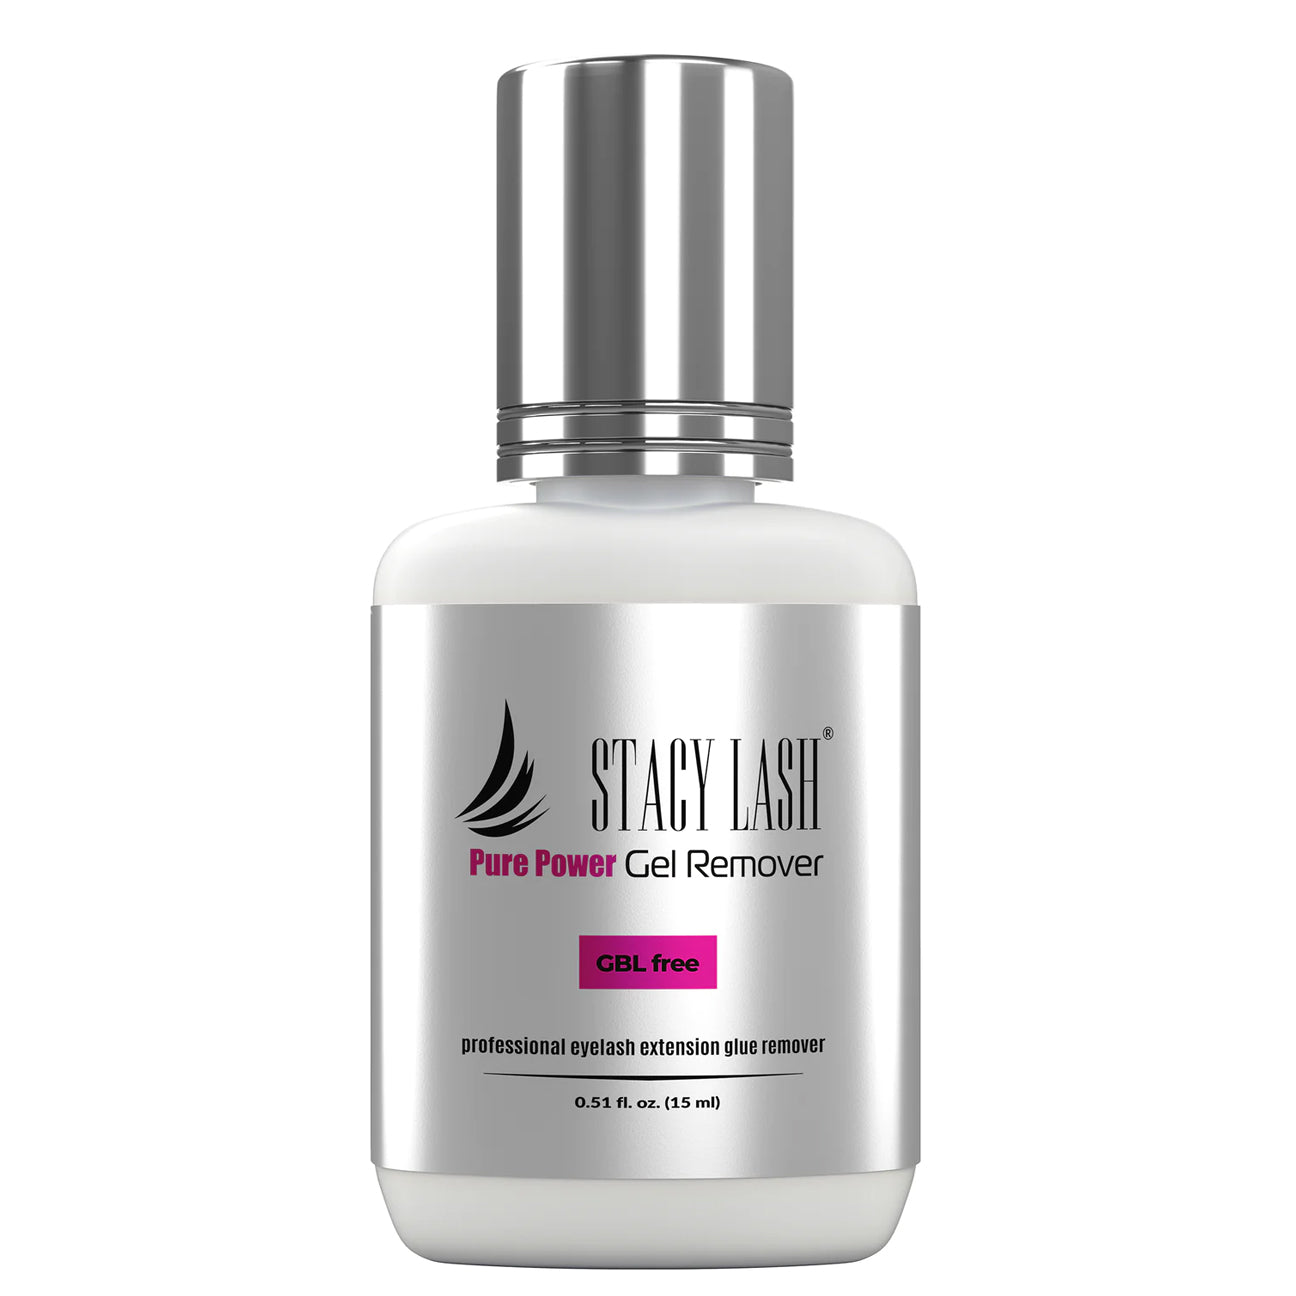 Stacy Lash Pure Power Gel Remover for Eyelash Extension Glue - 15ml